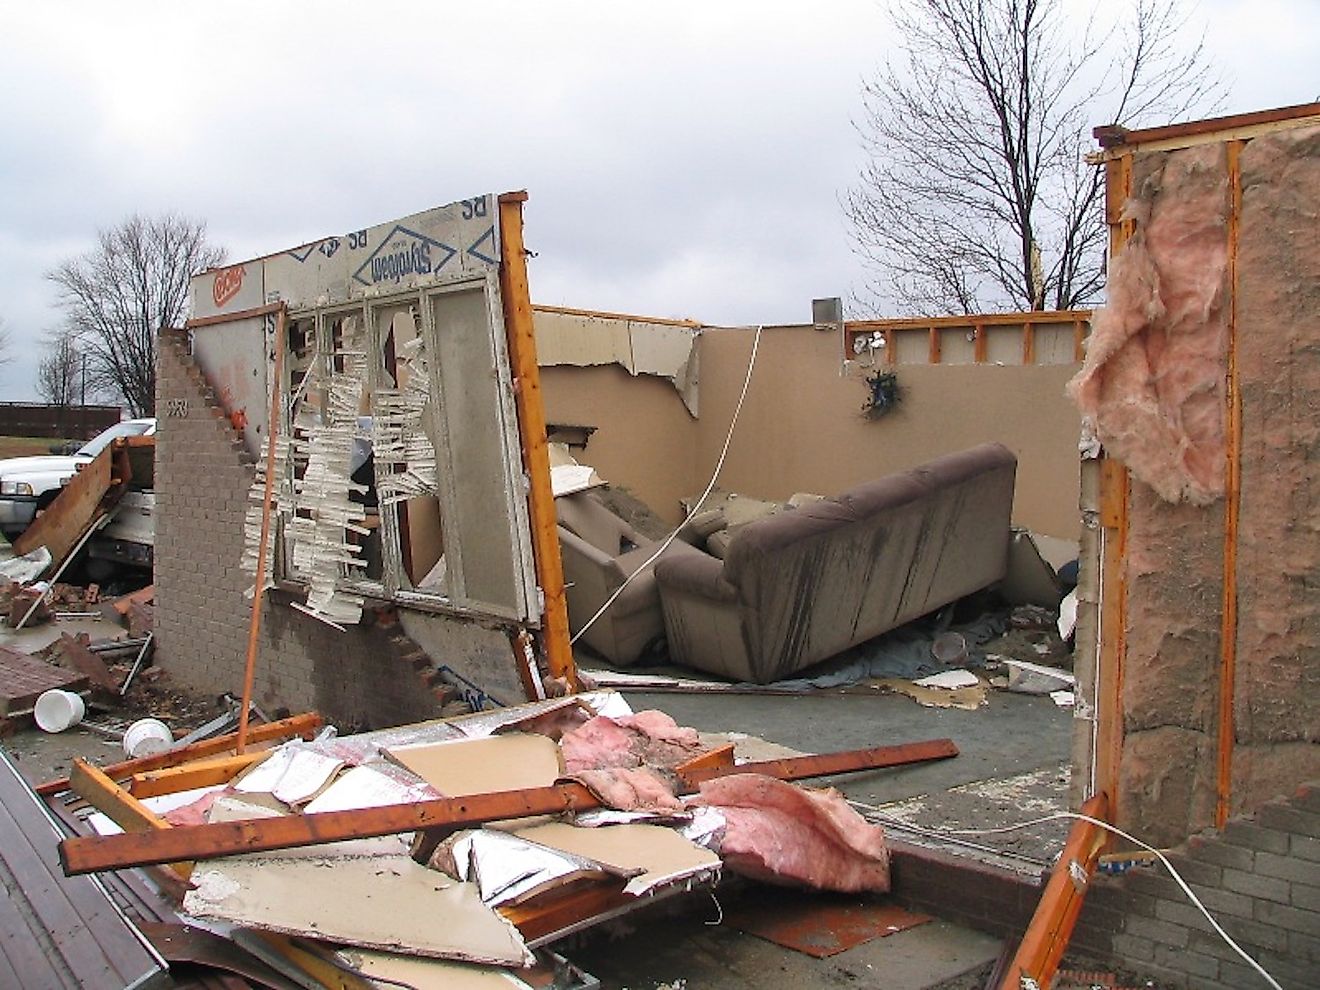 A home destroyed by an EF2 tornado in Dubois County, Indiana. Image credit: National Weather Service/Public domain